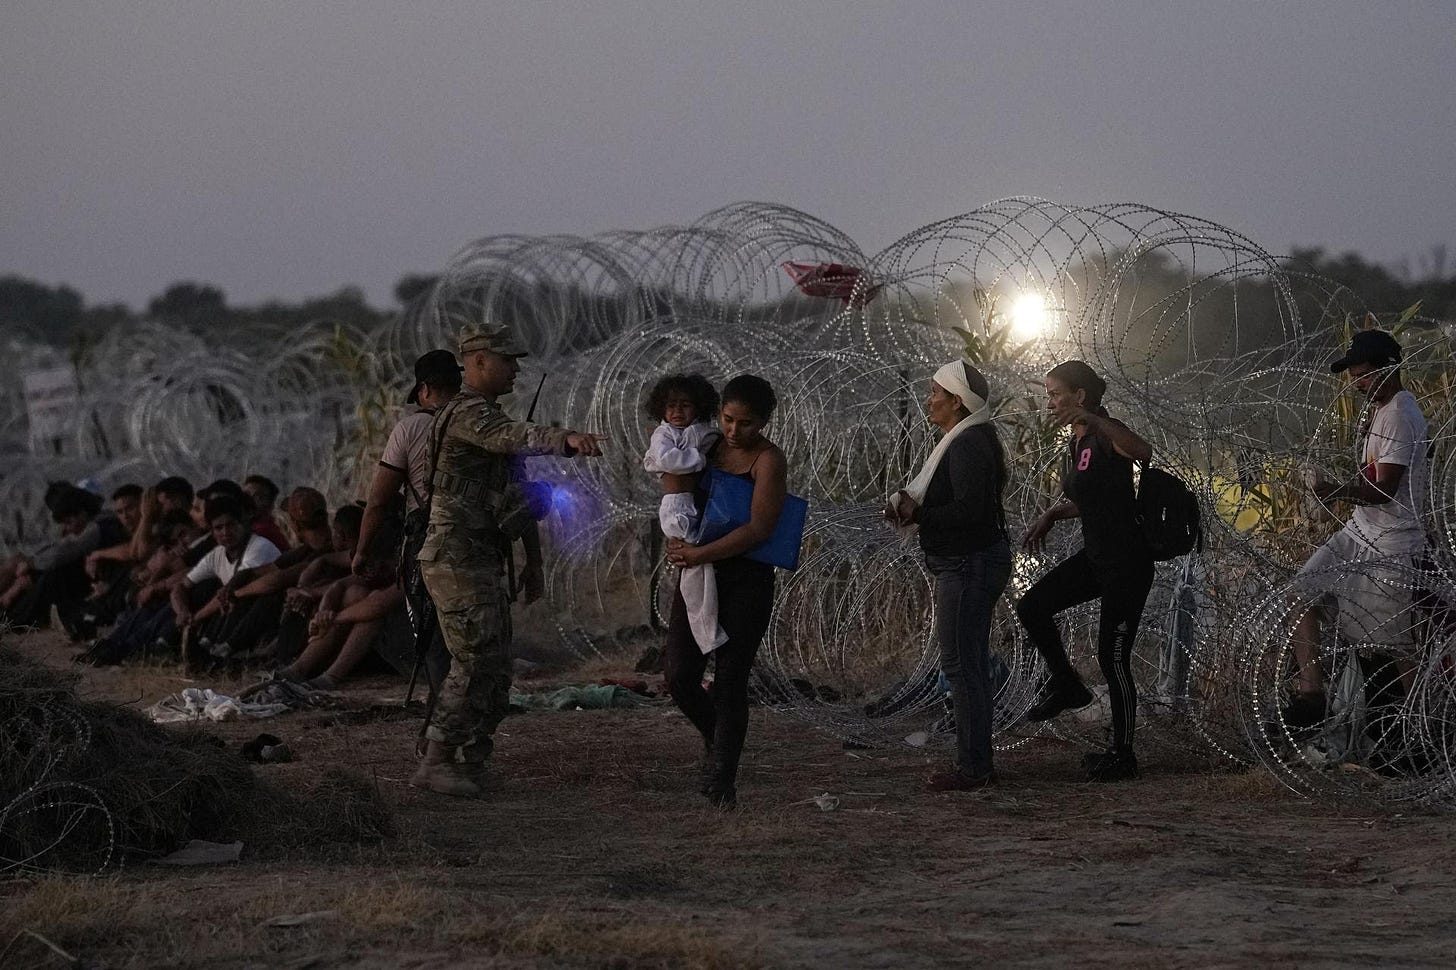 Migrants line up for processing after passing through razor wire.